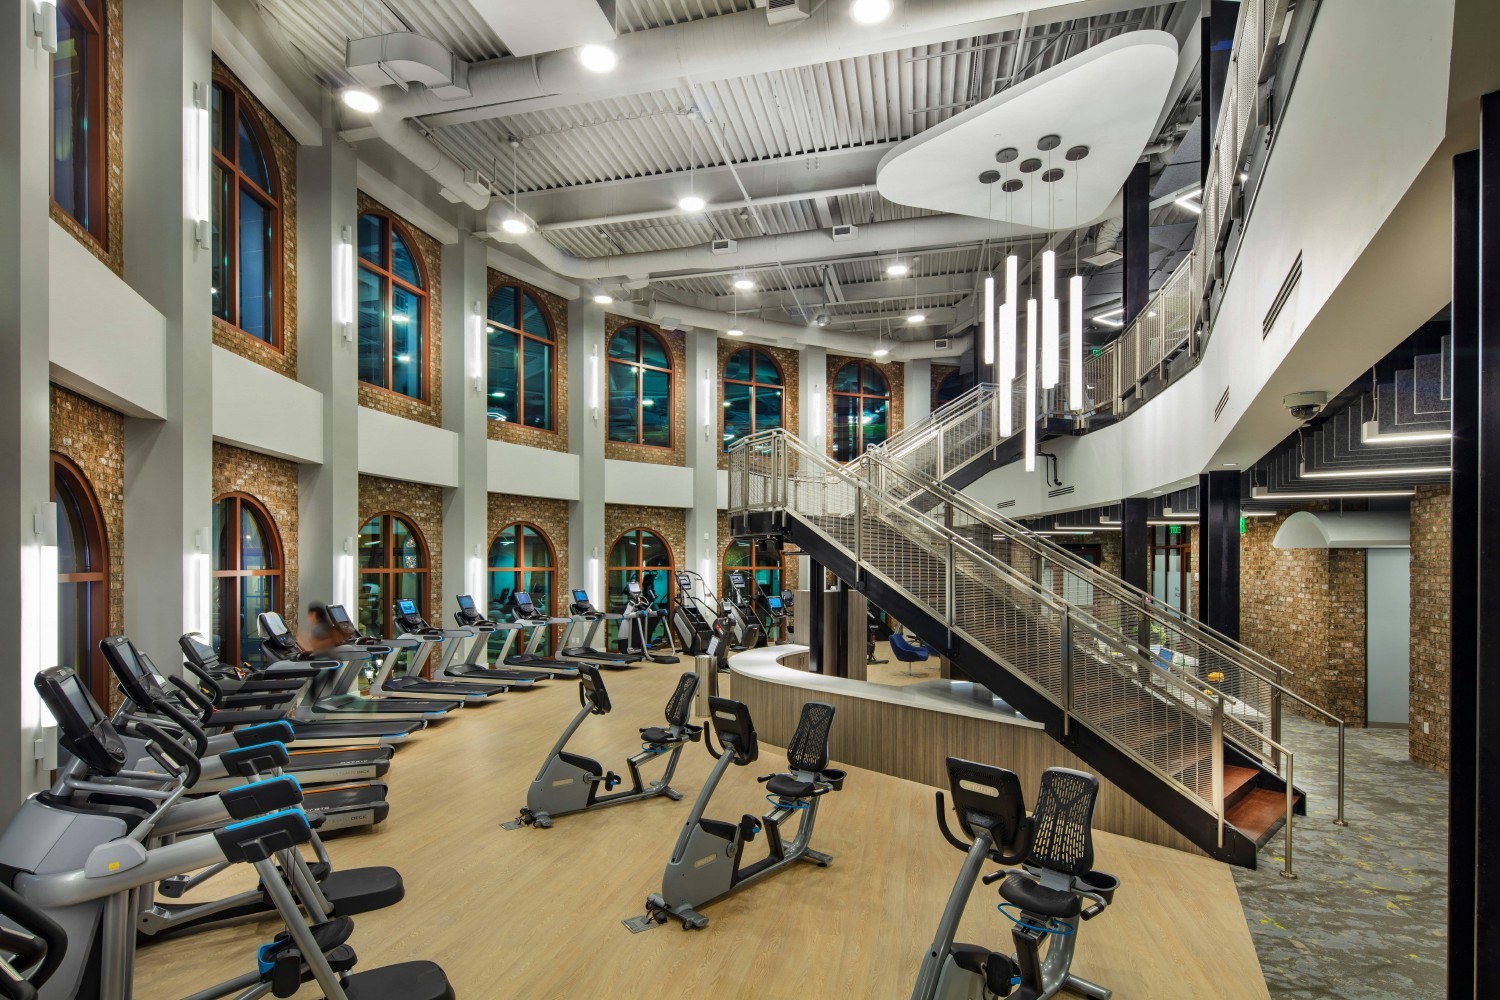 Our onsite fitness center includes an indoor pool, two levels of cardio and strength equipment, and fitness classes. 